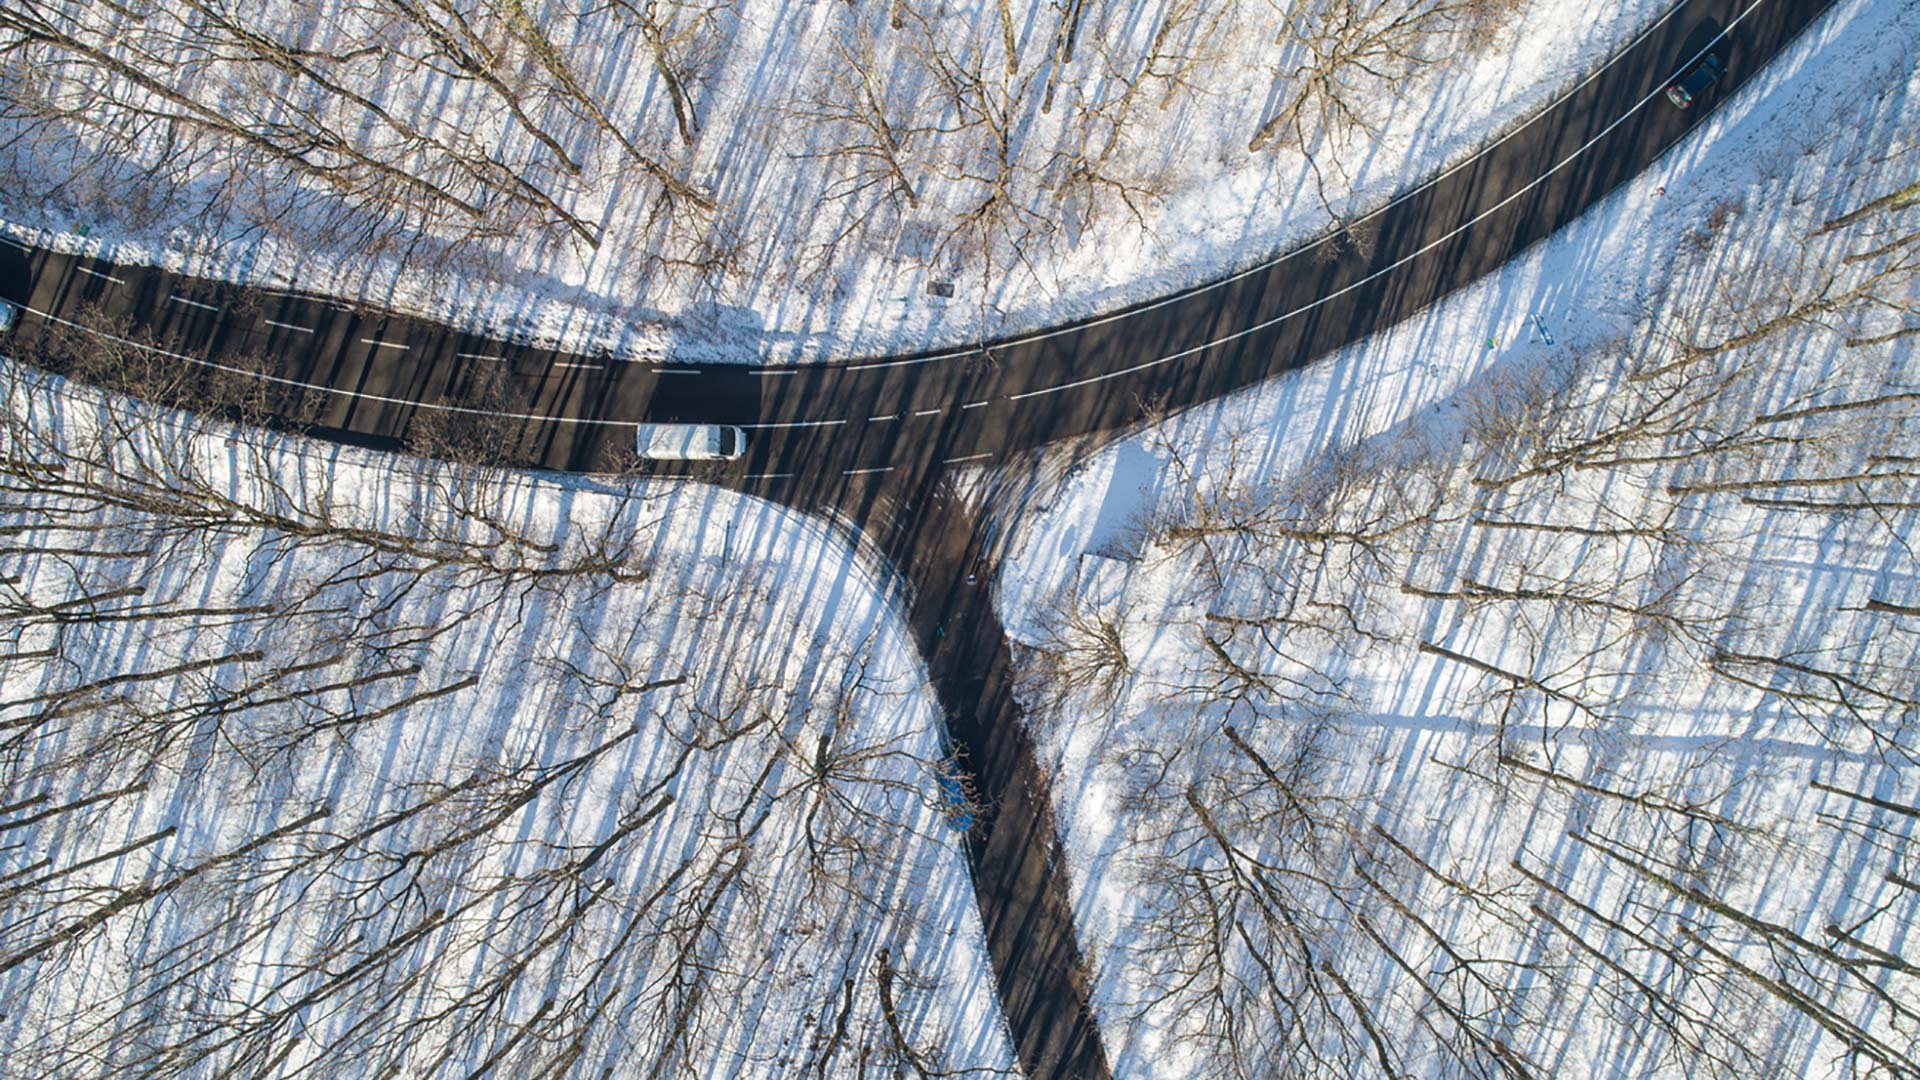 Road in winter forest